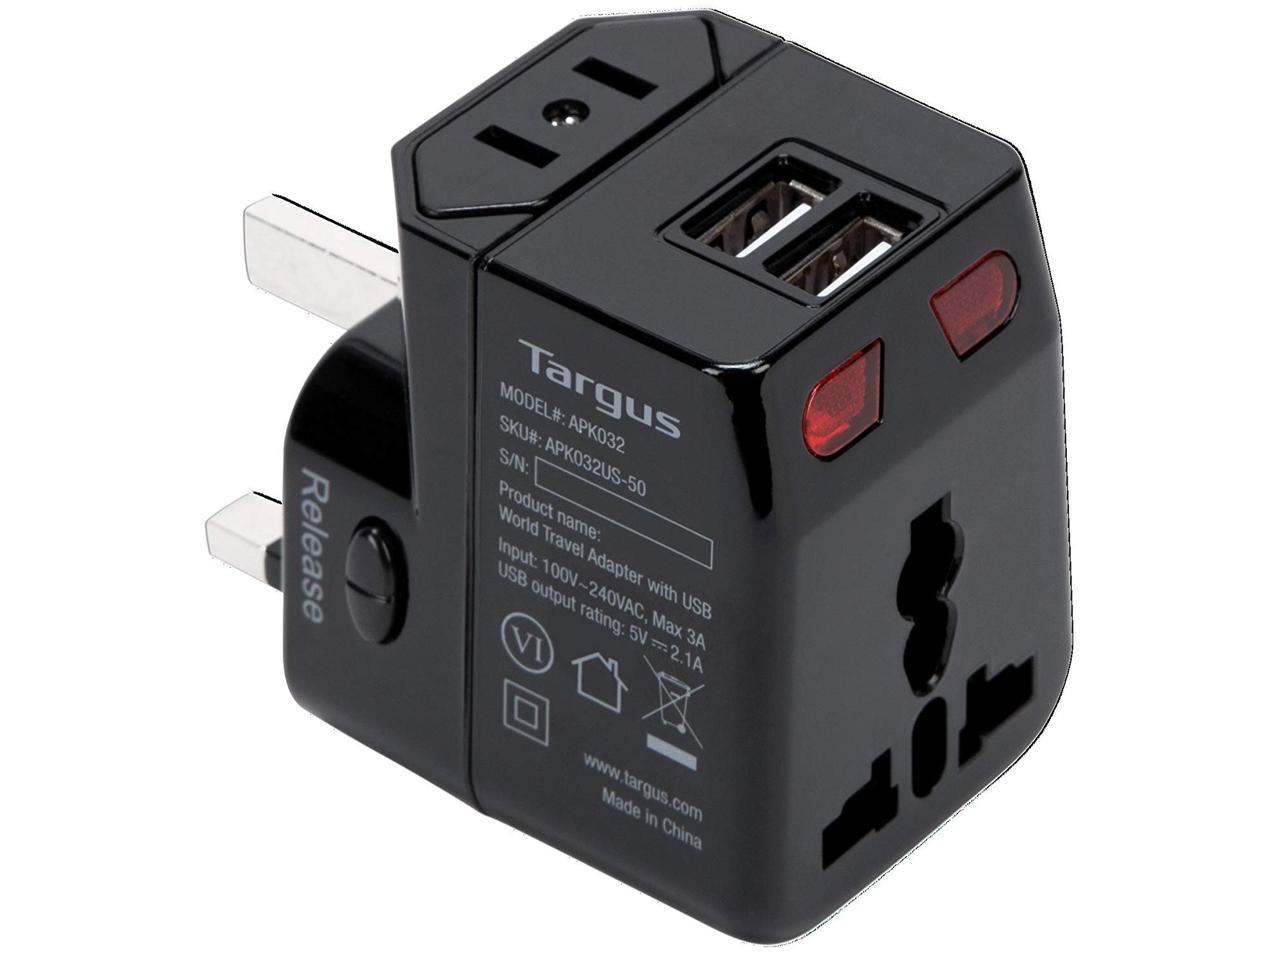 Targus World Travel Power Adapter with Dual USB Charging Ports - APK032US